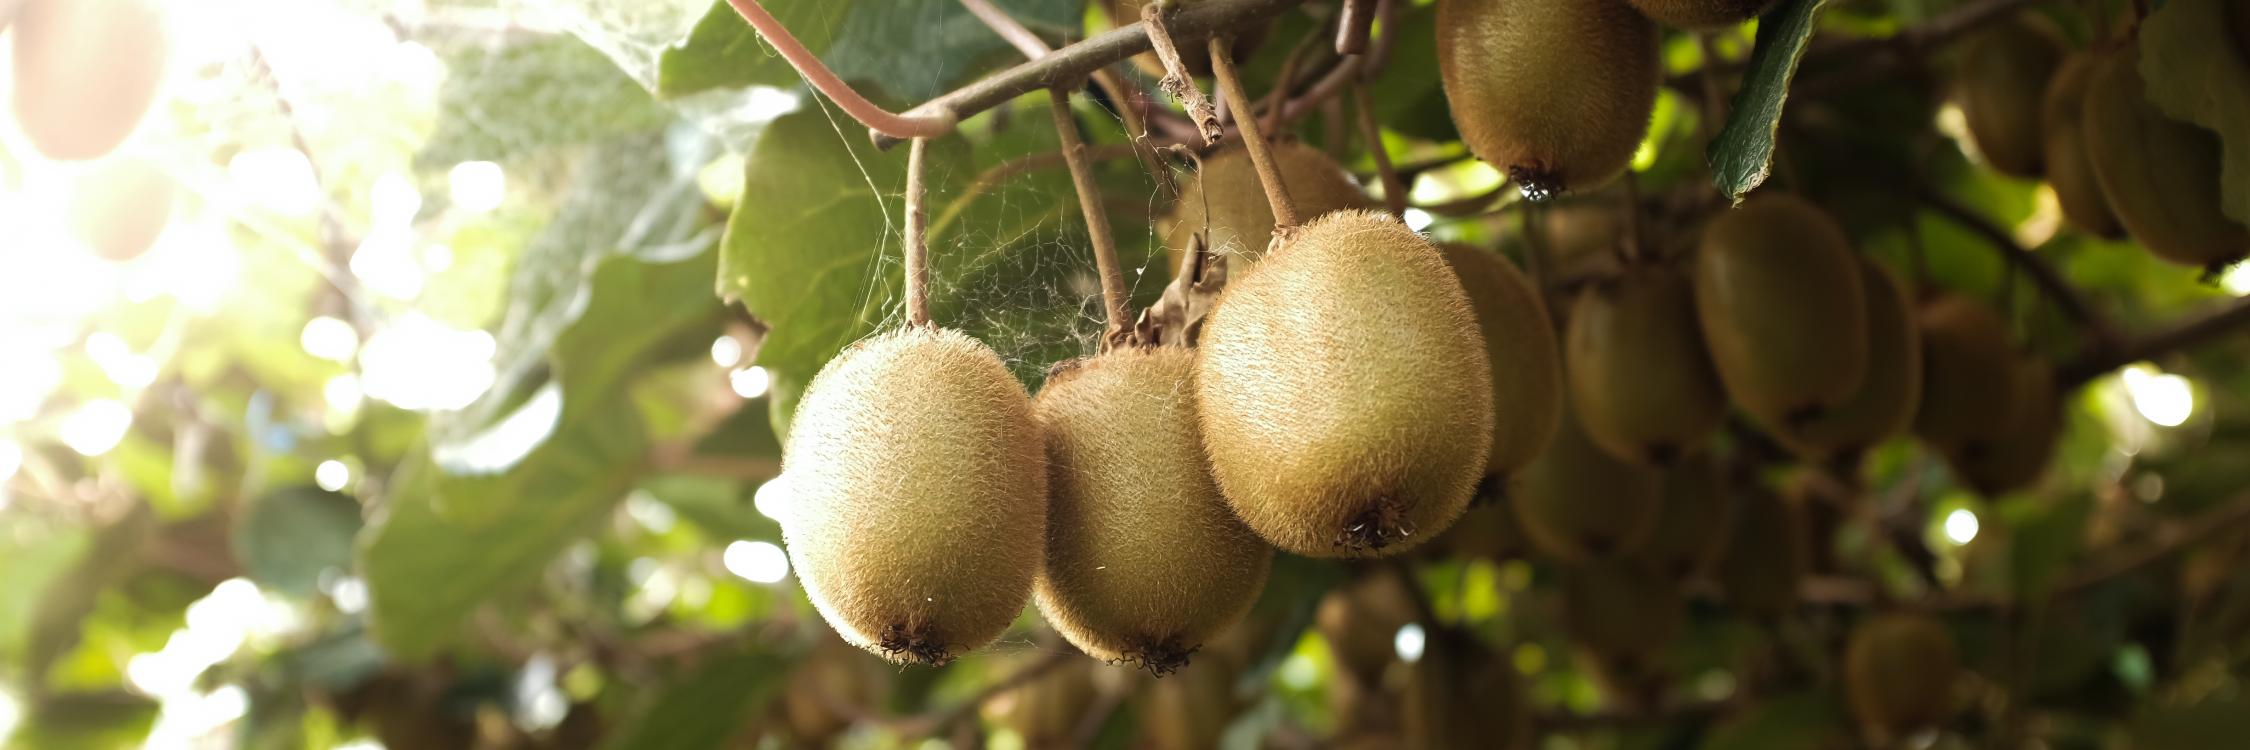 Everything you need to know about kiwis